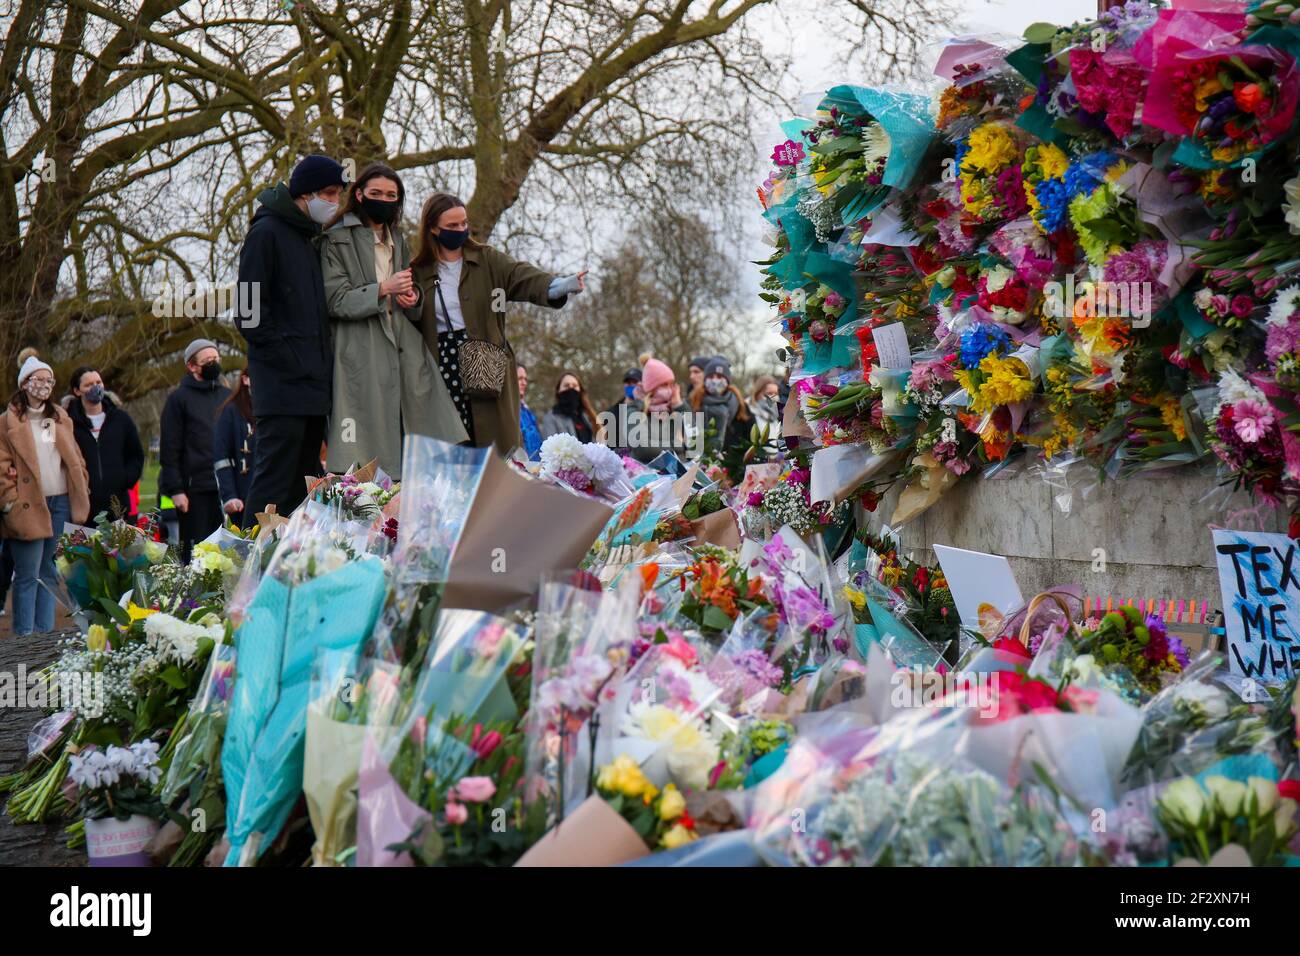 LONDON, ENGLAND - MARCH 13: Peoplelay flowers to pay their respects following the murder of Sarah Everard after an official vigil was cancelled due to the Covid-19 pandemic. Metropolitian Police Officer Wayne Couzens has been charged with her kidnap and murder. on Saturday 13th March 2021. (Credit: Lucy North | MI News) Credit: MI News & Sport /Alamy Live News Stock Photo